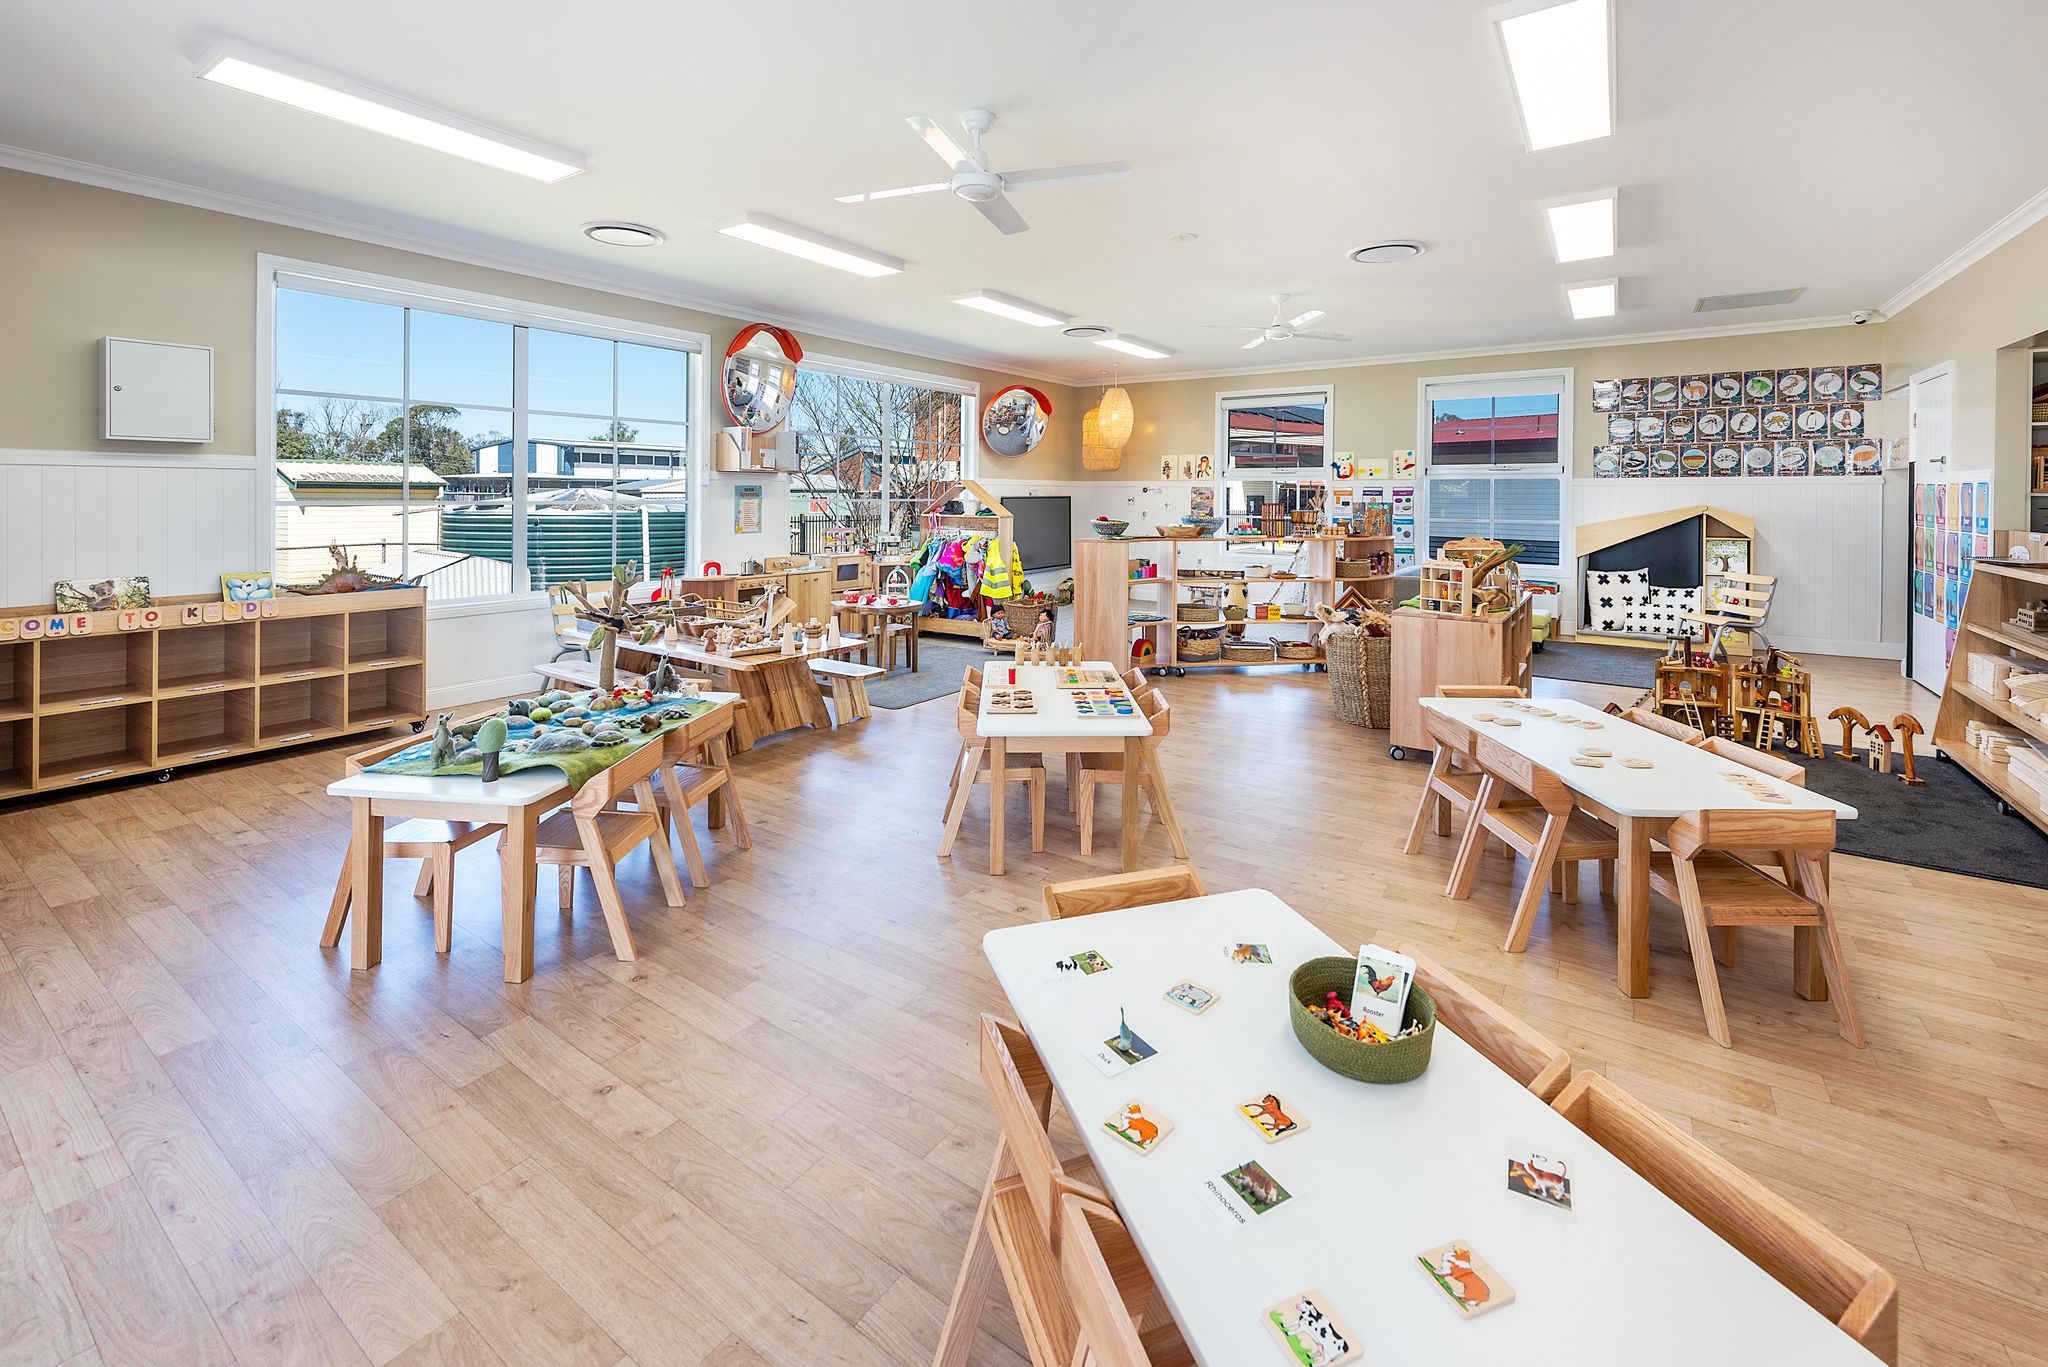 Grow Early Education Dalby - Now Open!